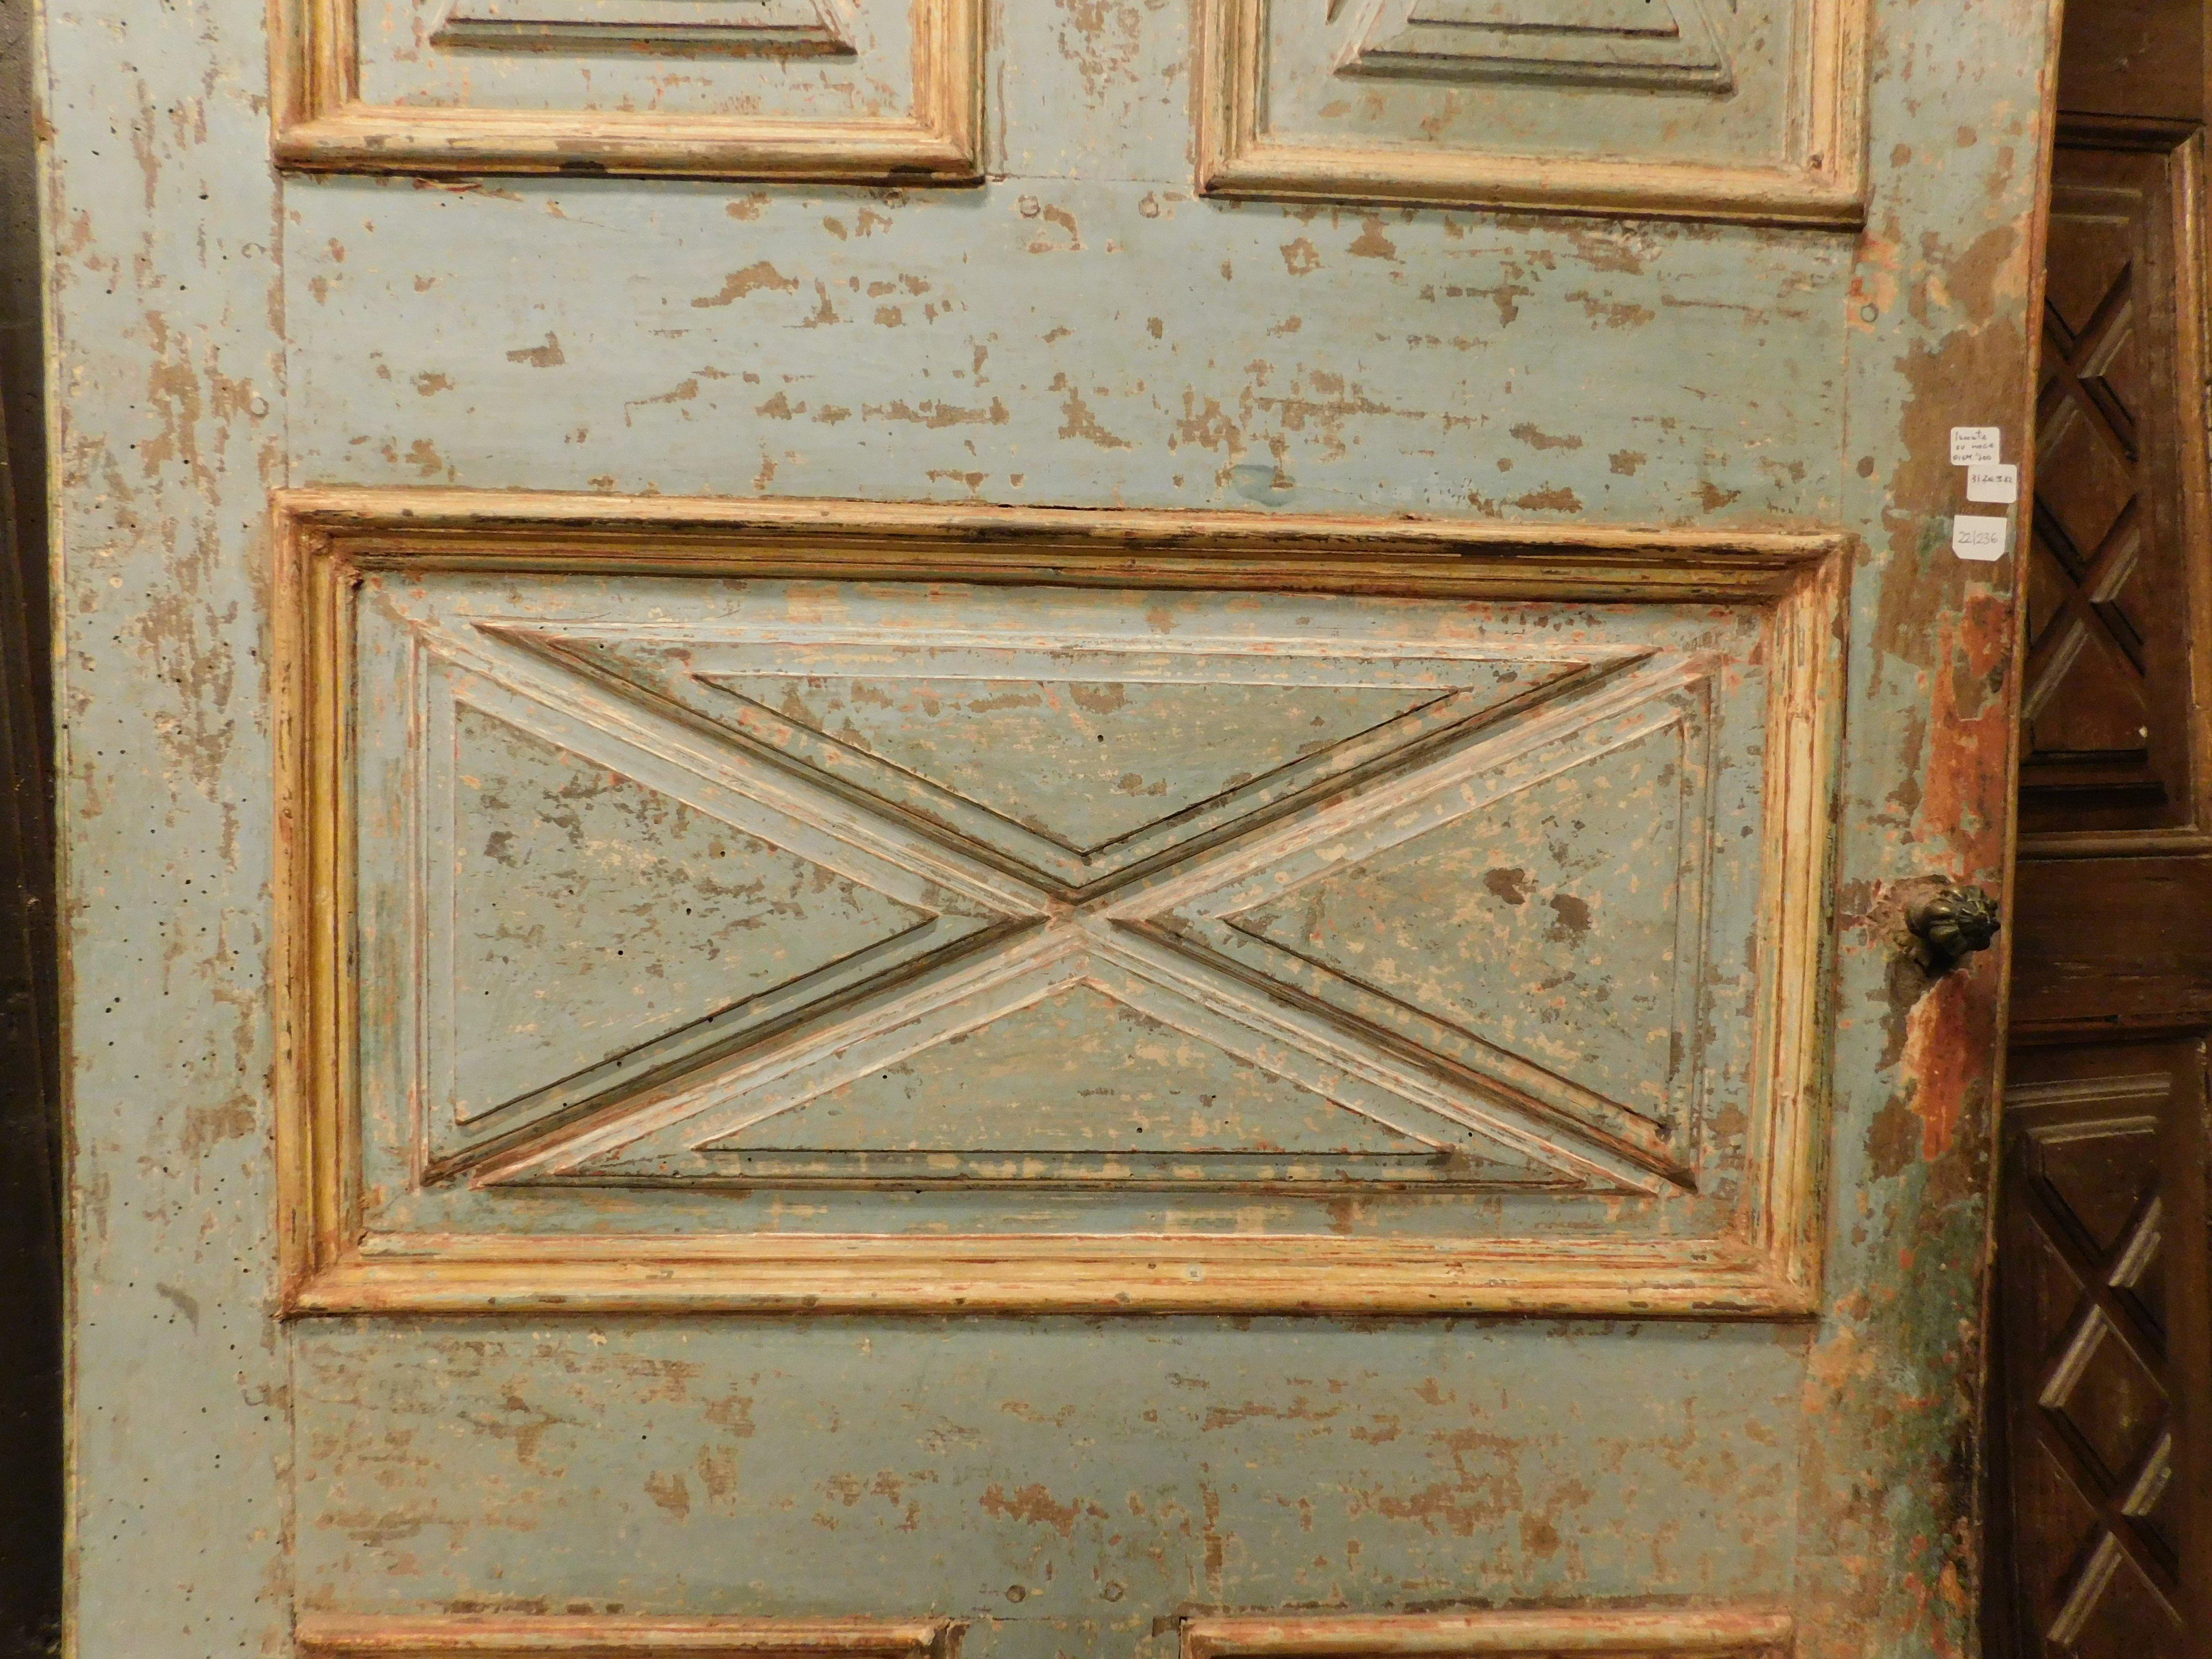 Hand-Carved Antique Door, Carved and Lacquered on Walnut Wood, 18th Century Italy